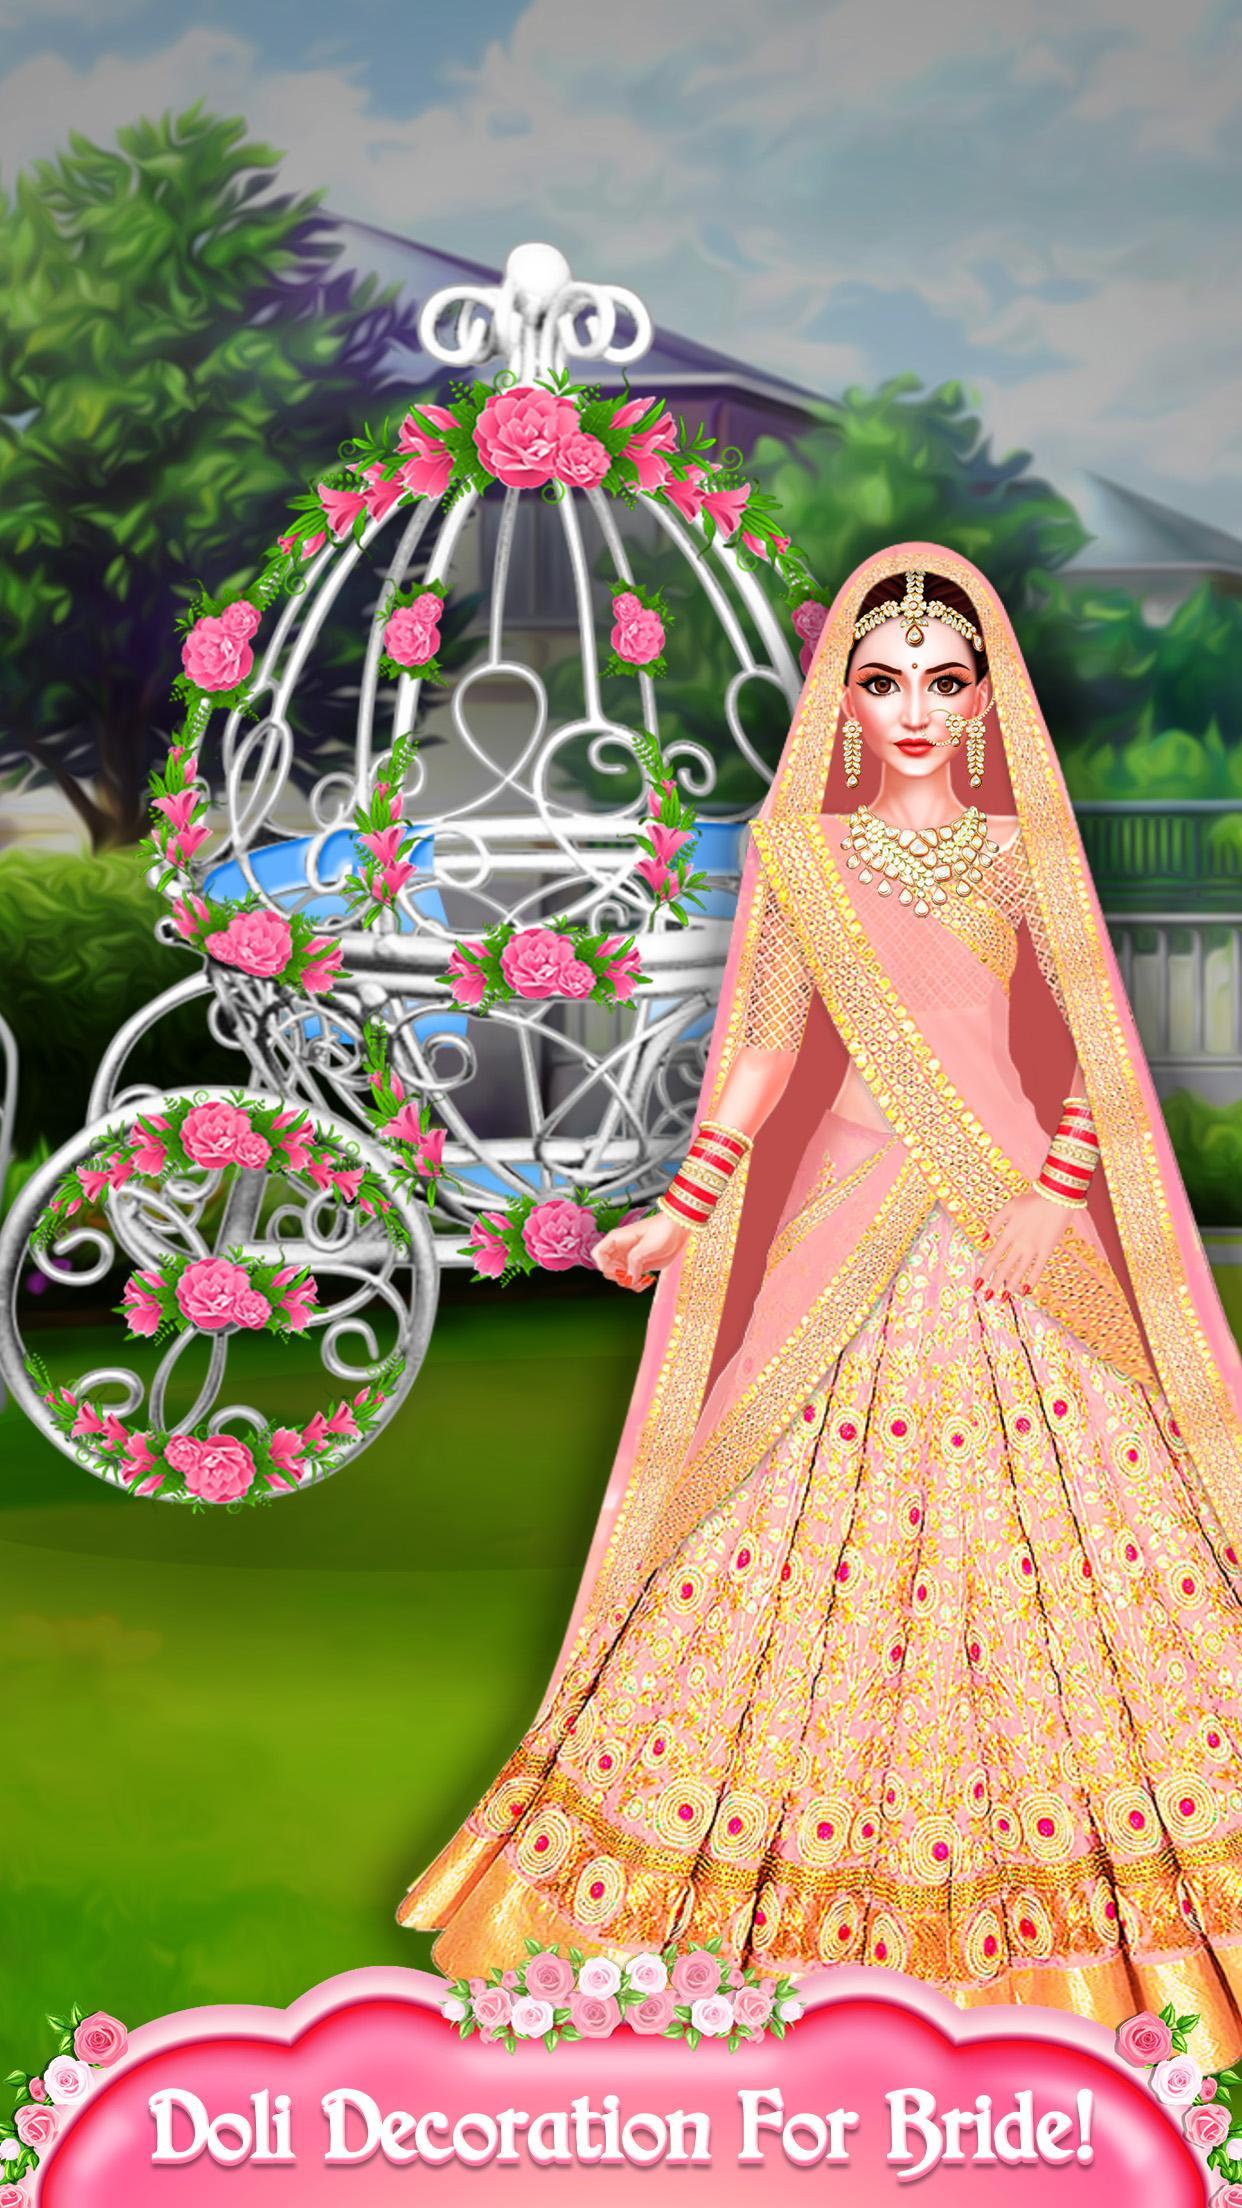 Big Fat Indian Wedding Makeup And Dressup Games For Android Apk Download